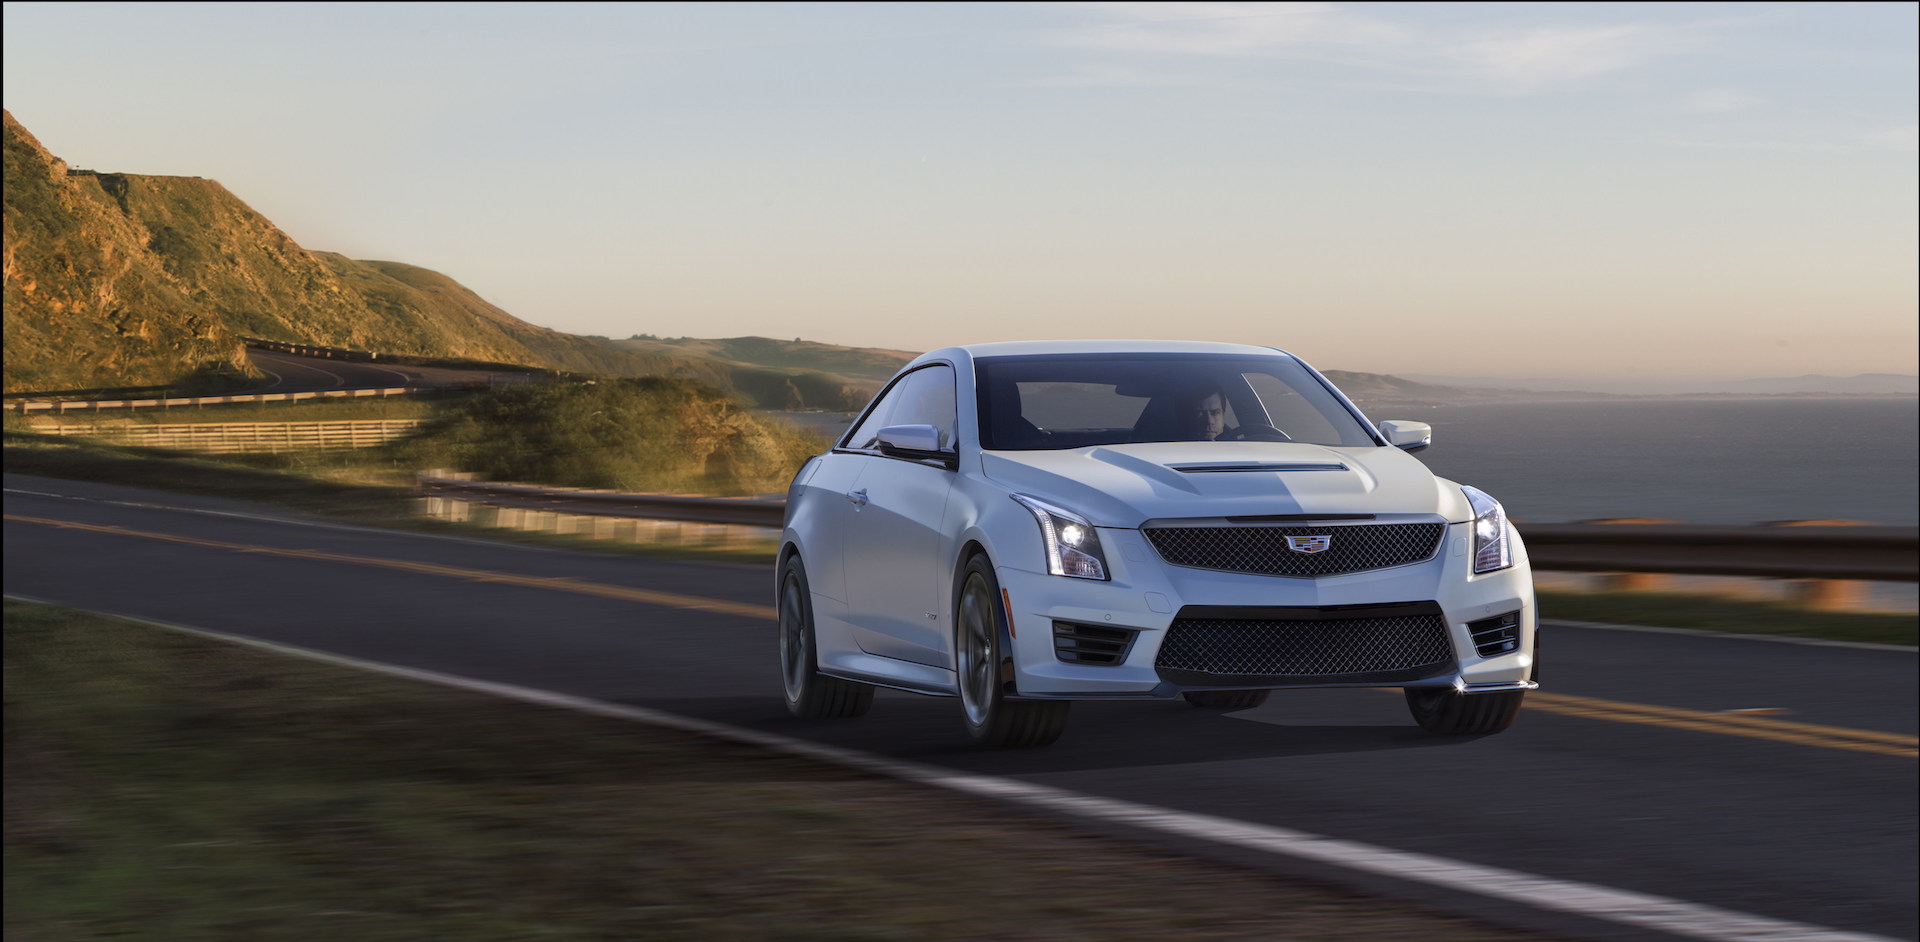 2019 Cadillac ATS Summary Review - The Car Connection